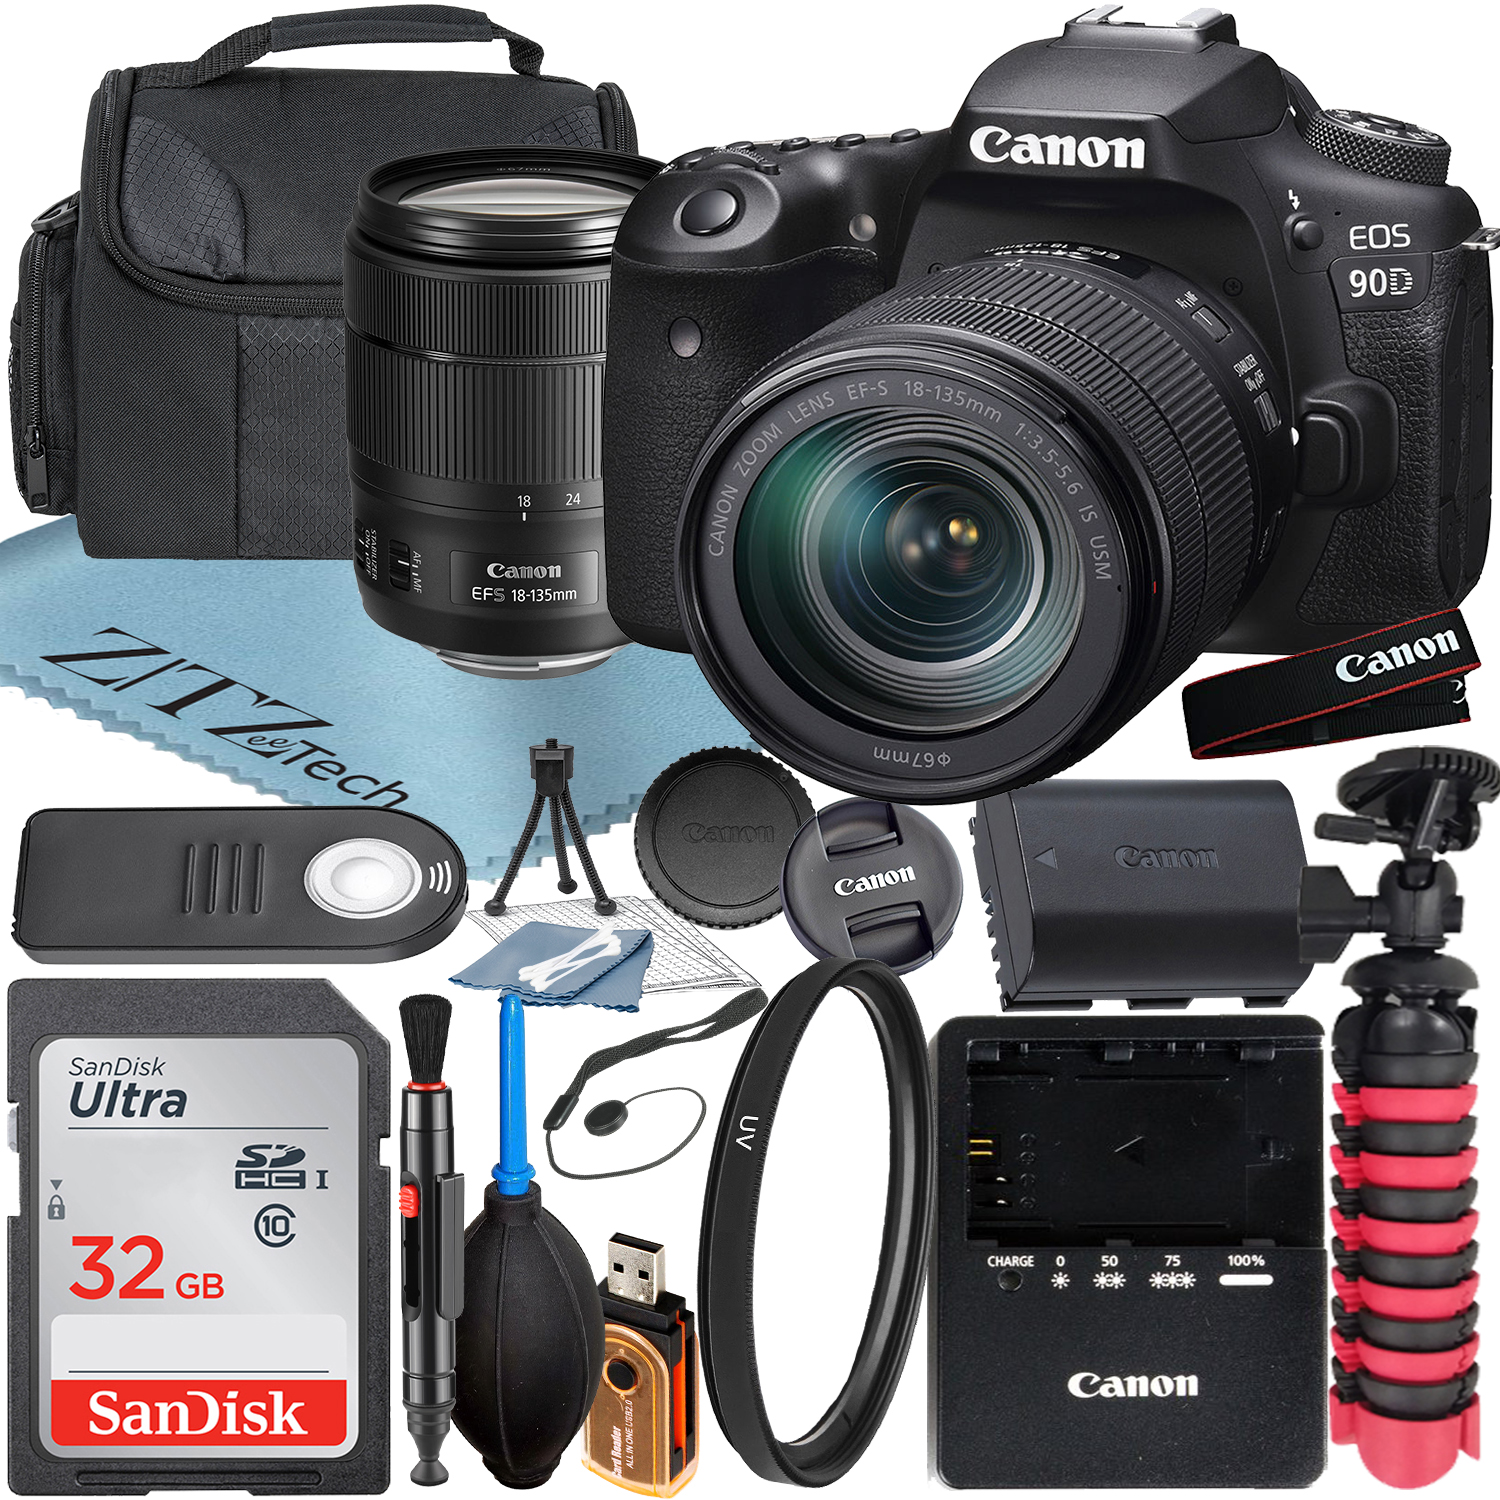 Canon EOS 90D DSLR Camera with 18-135mm IS USM Lens + SanDisk 32GB Memory Card + Case + UV Filter + ZeeTech Accessory Bundle